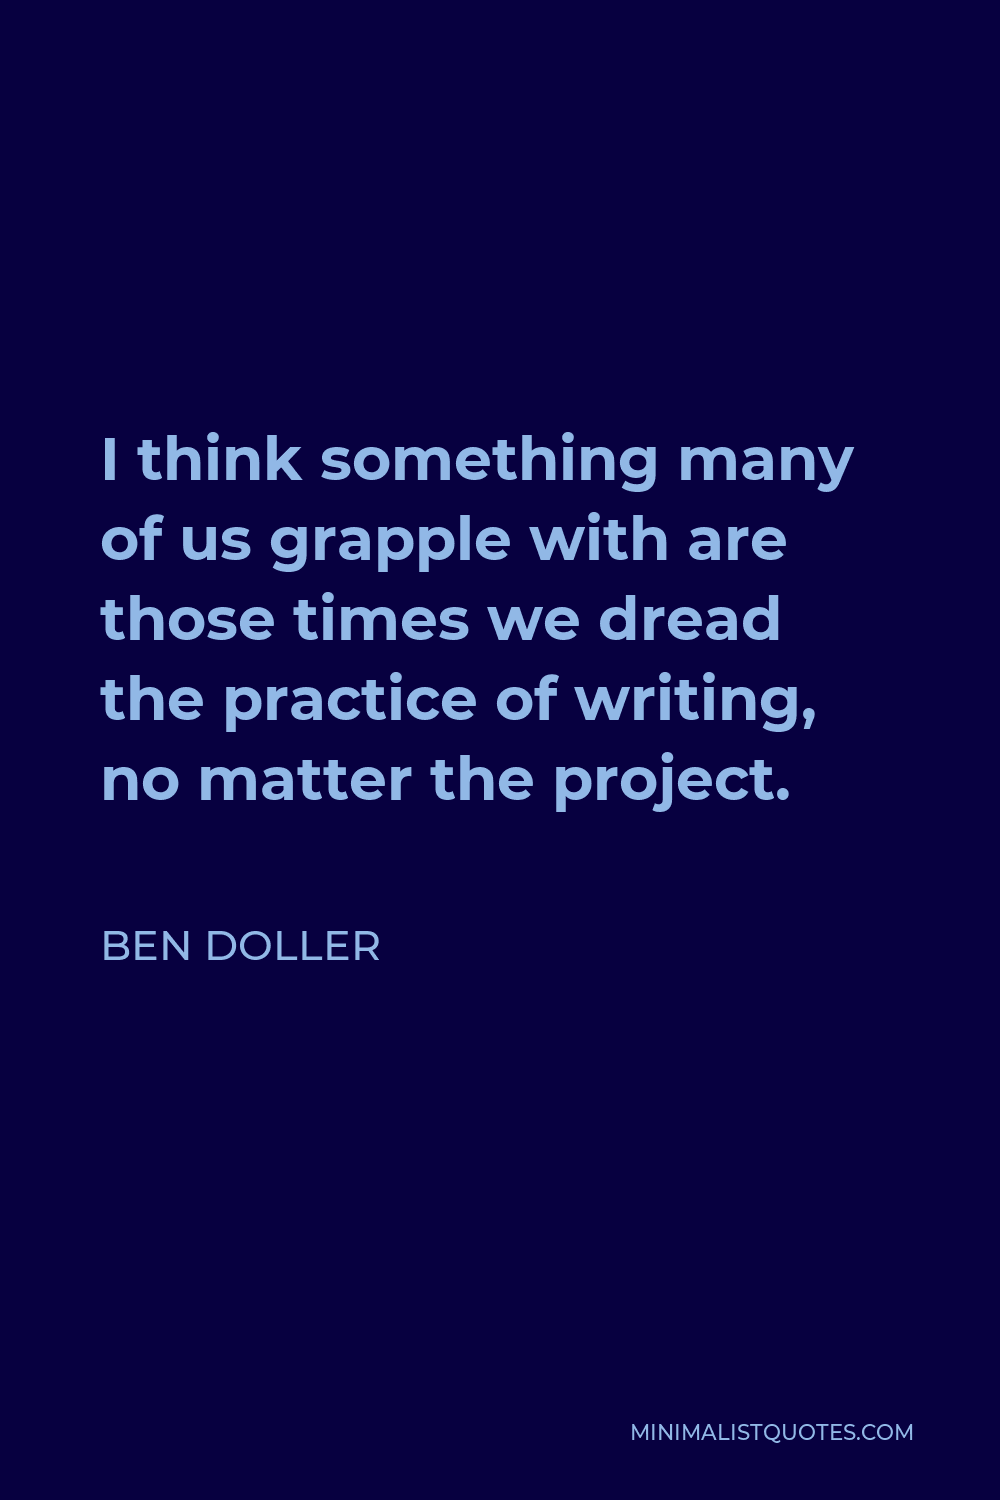 Ben Doller Quote - I think something many of us grapple with are those times we dread the practice of writing, no matter the project.